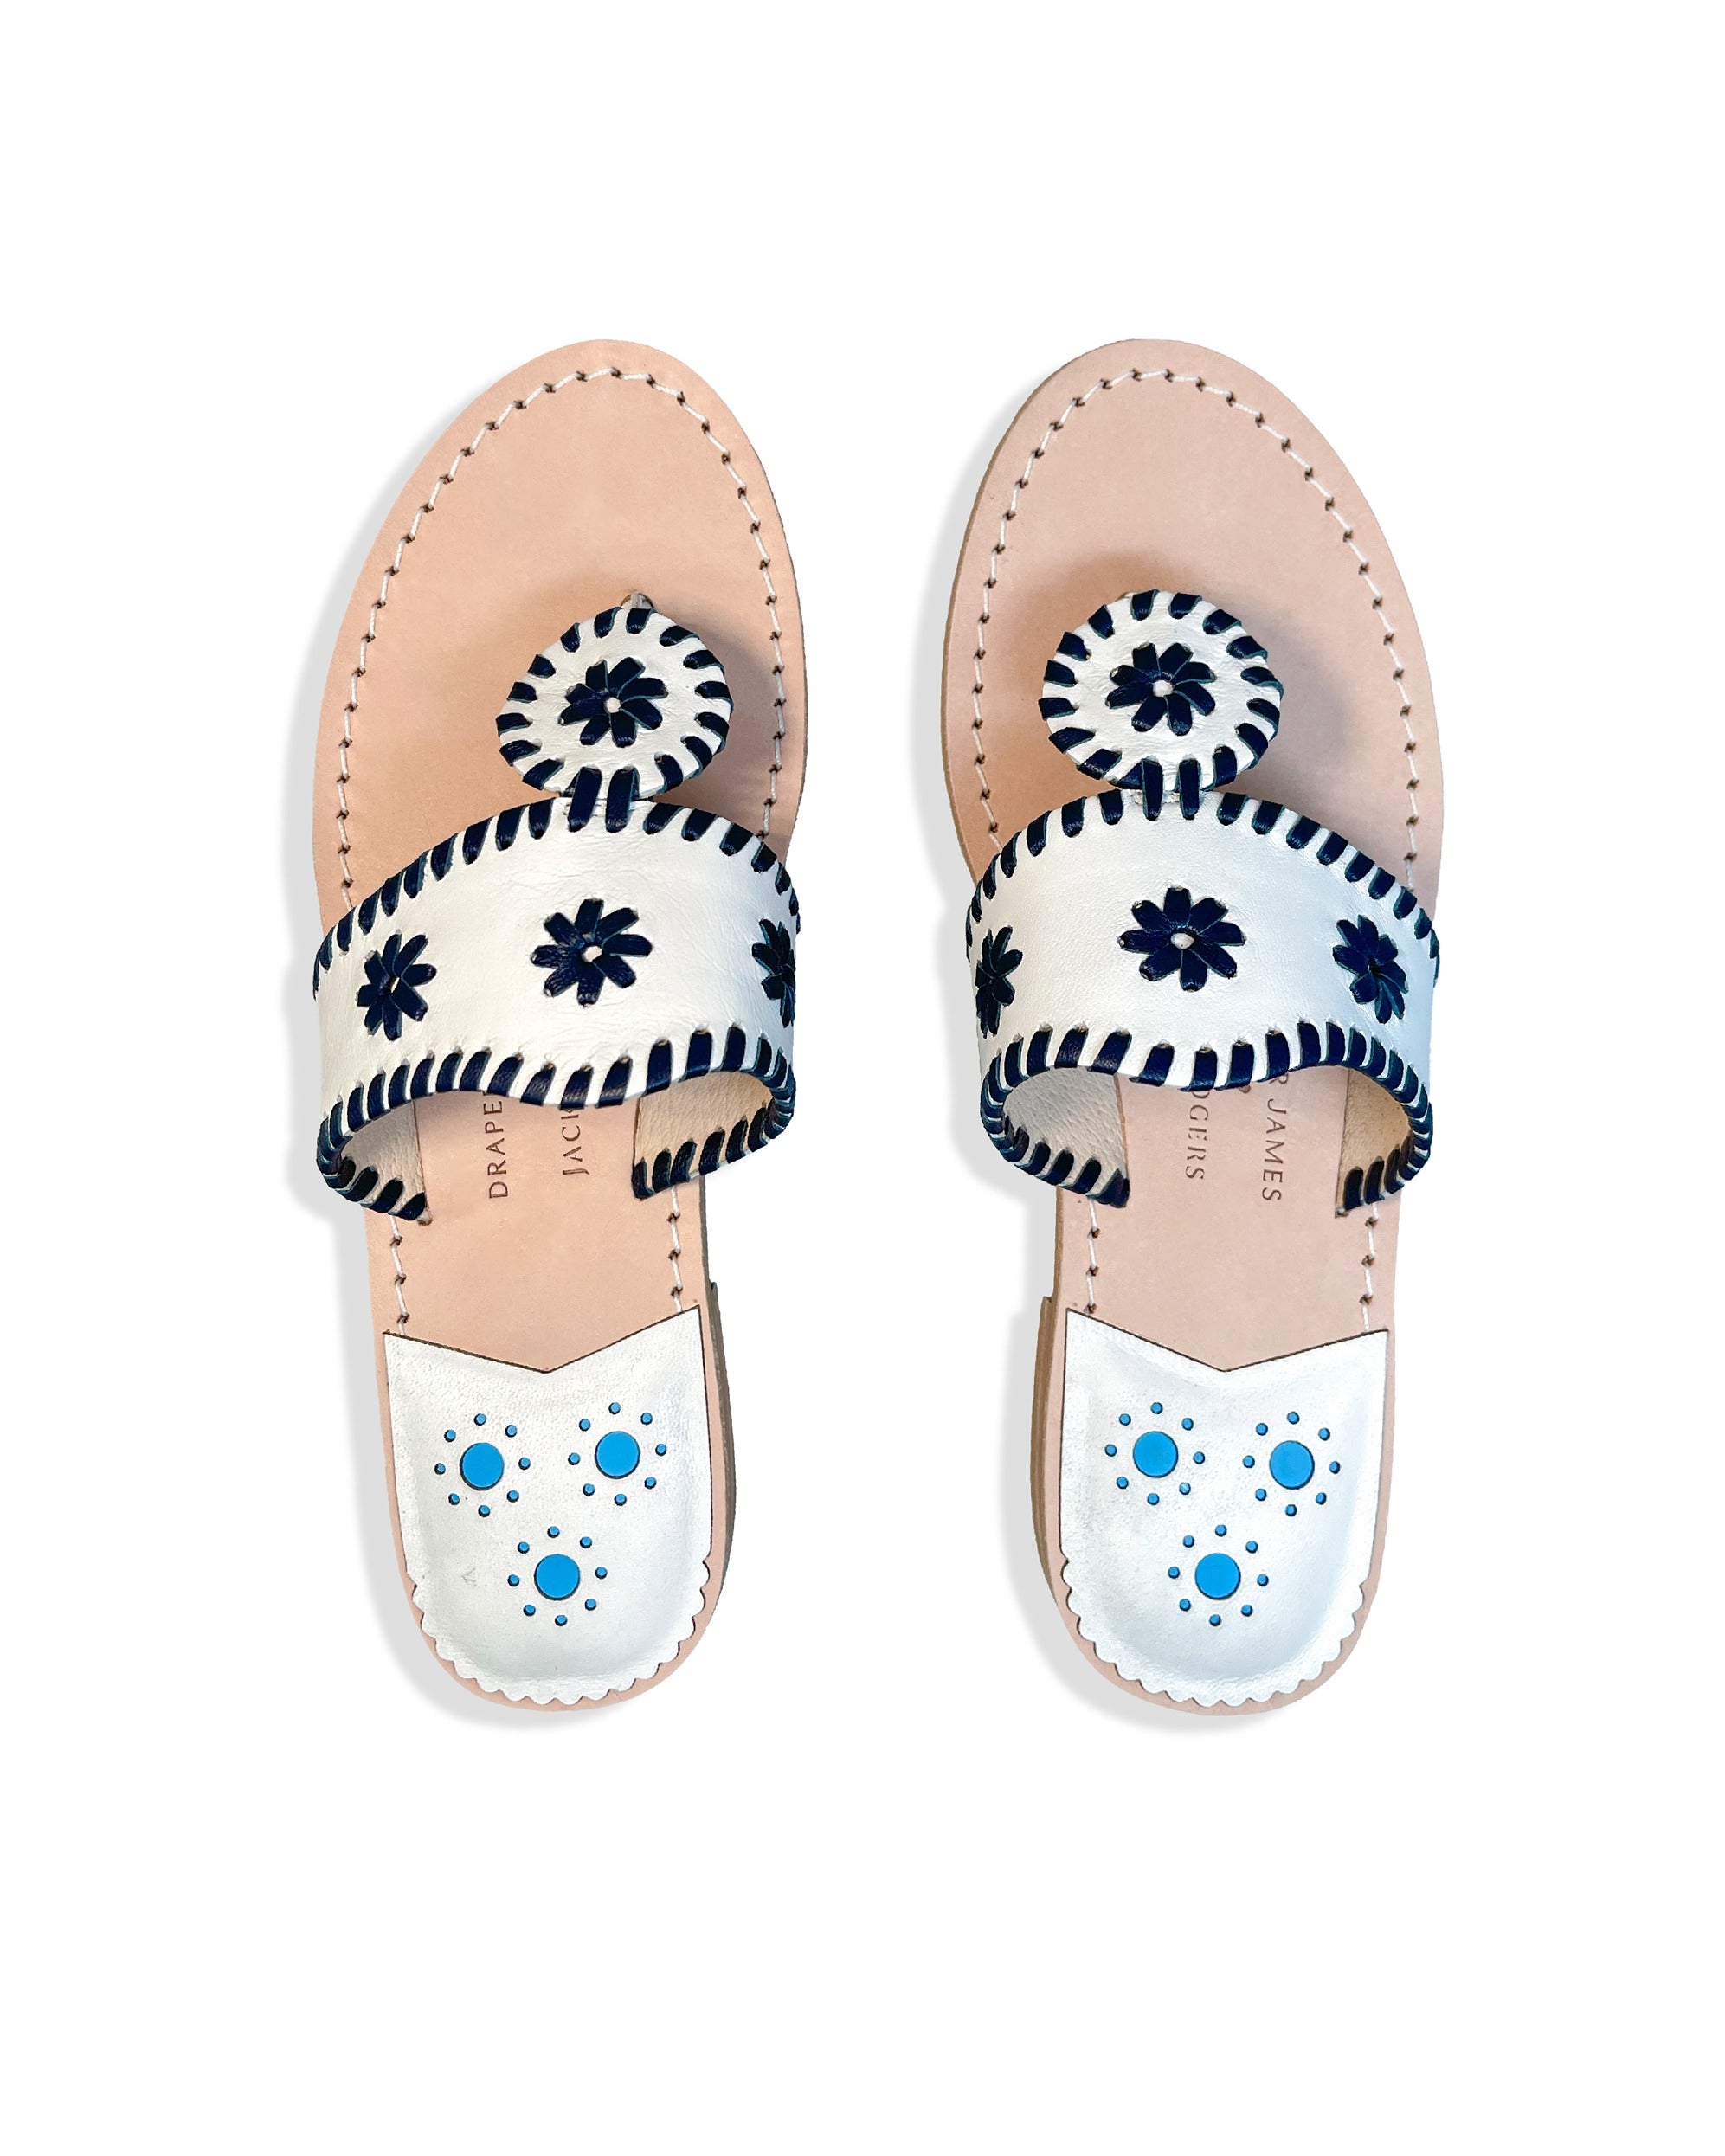 DJ x Jack Rogers Classic Sandal in White and Navy